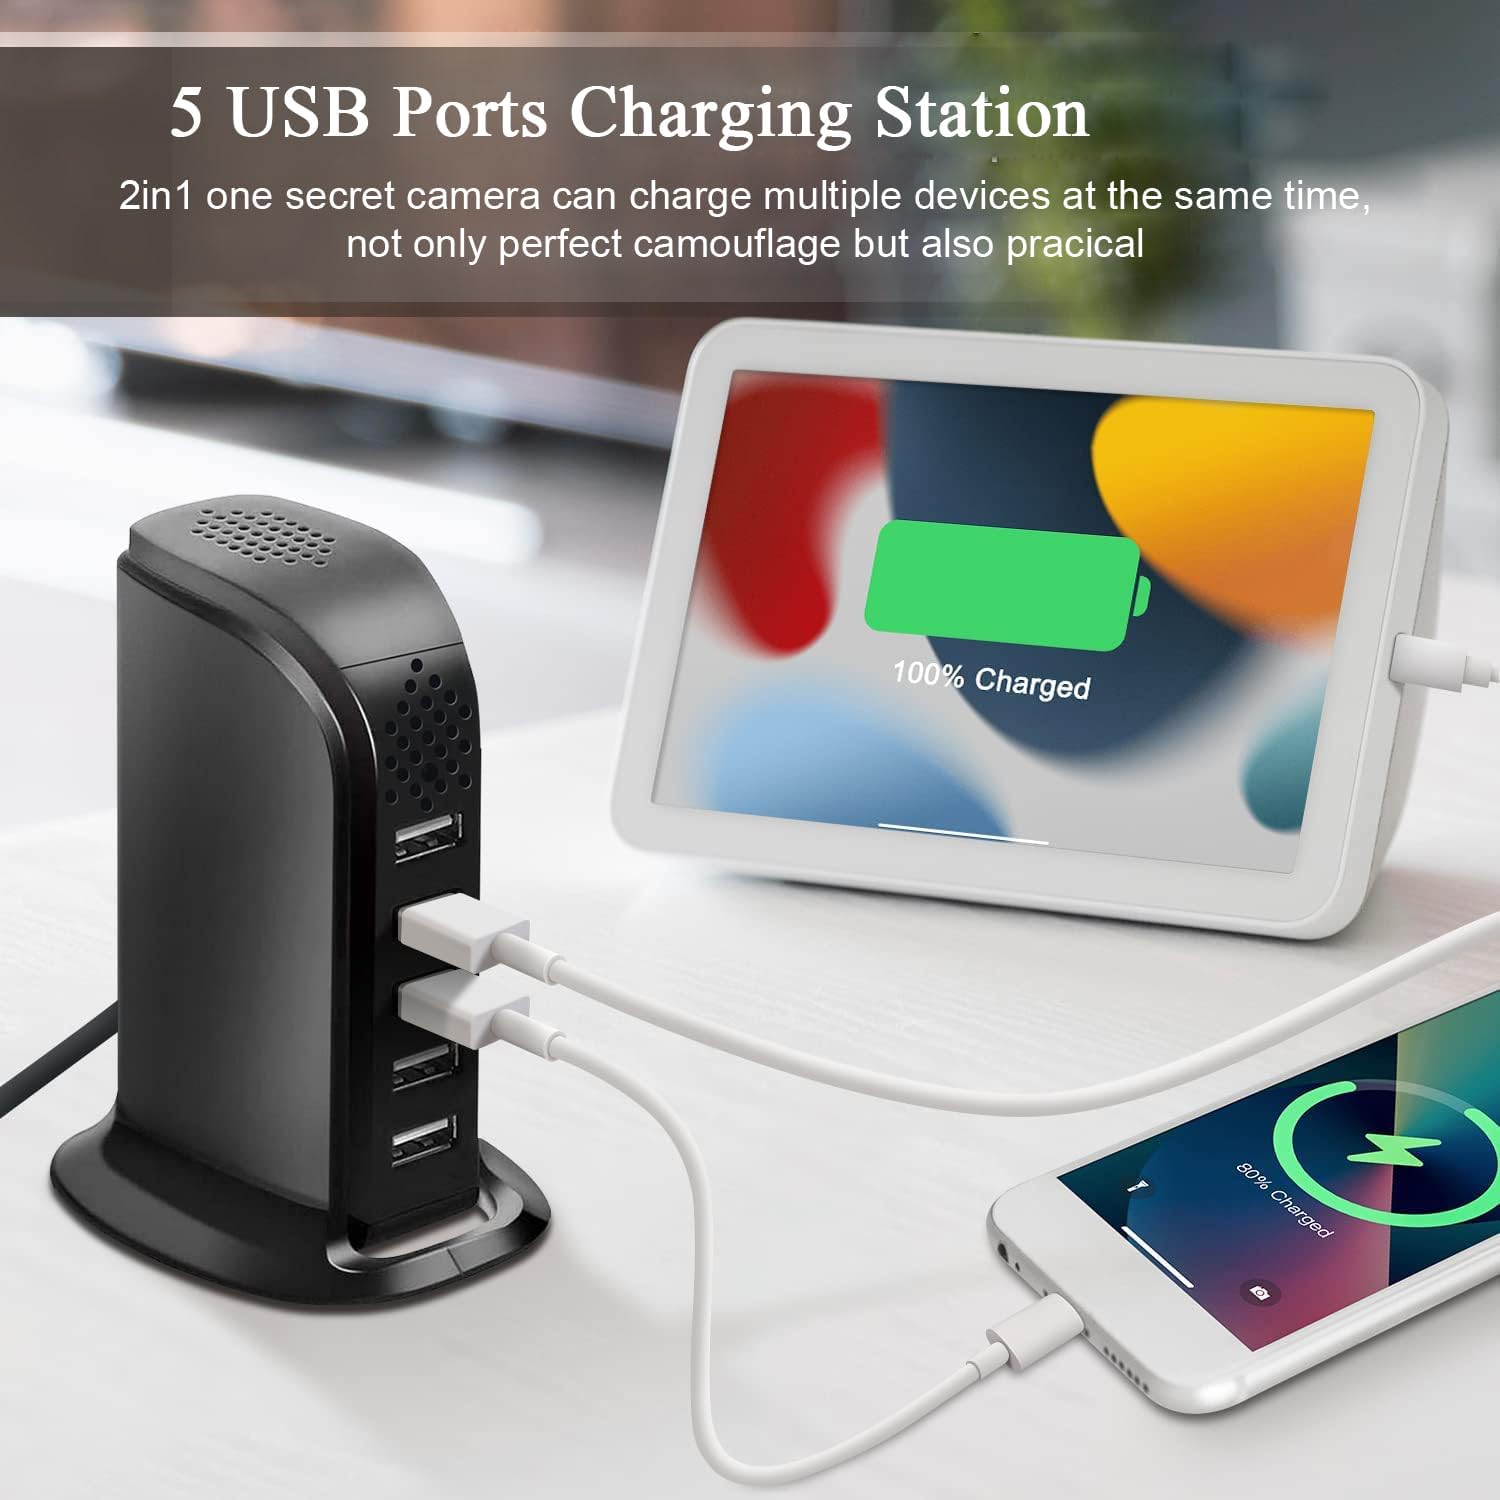 WiFi USB Charger Hidden Camera,1080P Mini Video Recording, Motion Detection, APP Remote View - Indoor Security Spy Camera with 5-Port USB Charging Station, Secret Nanny Cam for Home/Office, No Audio